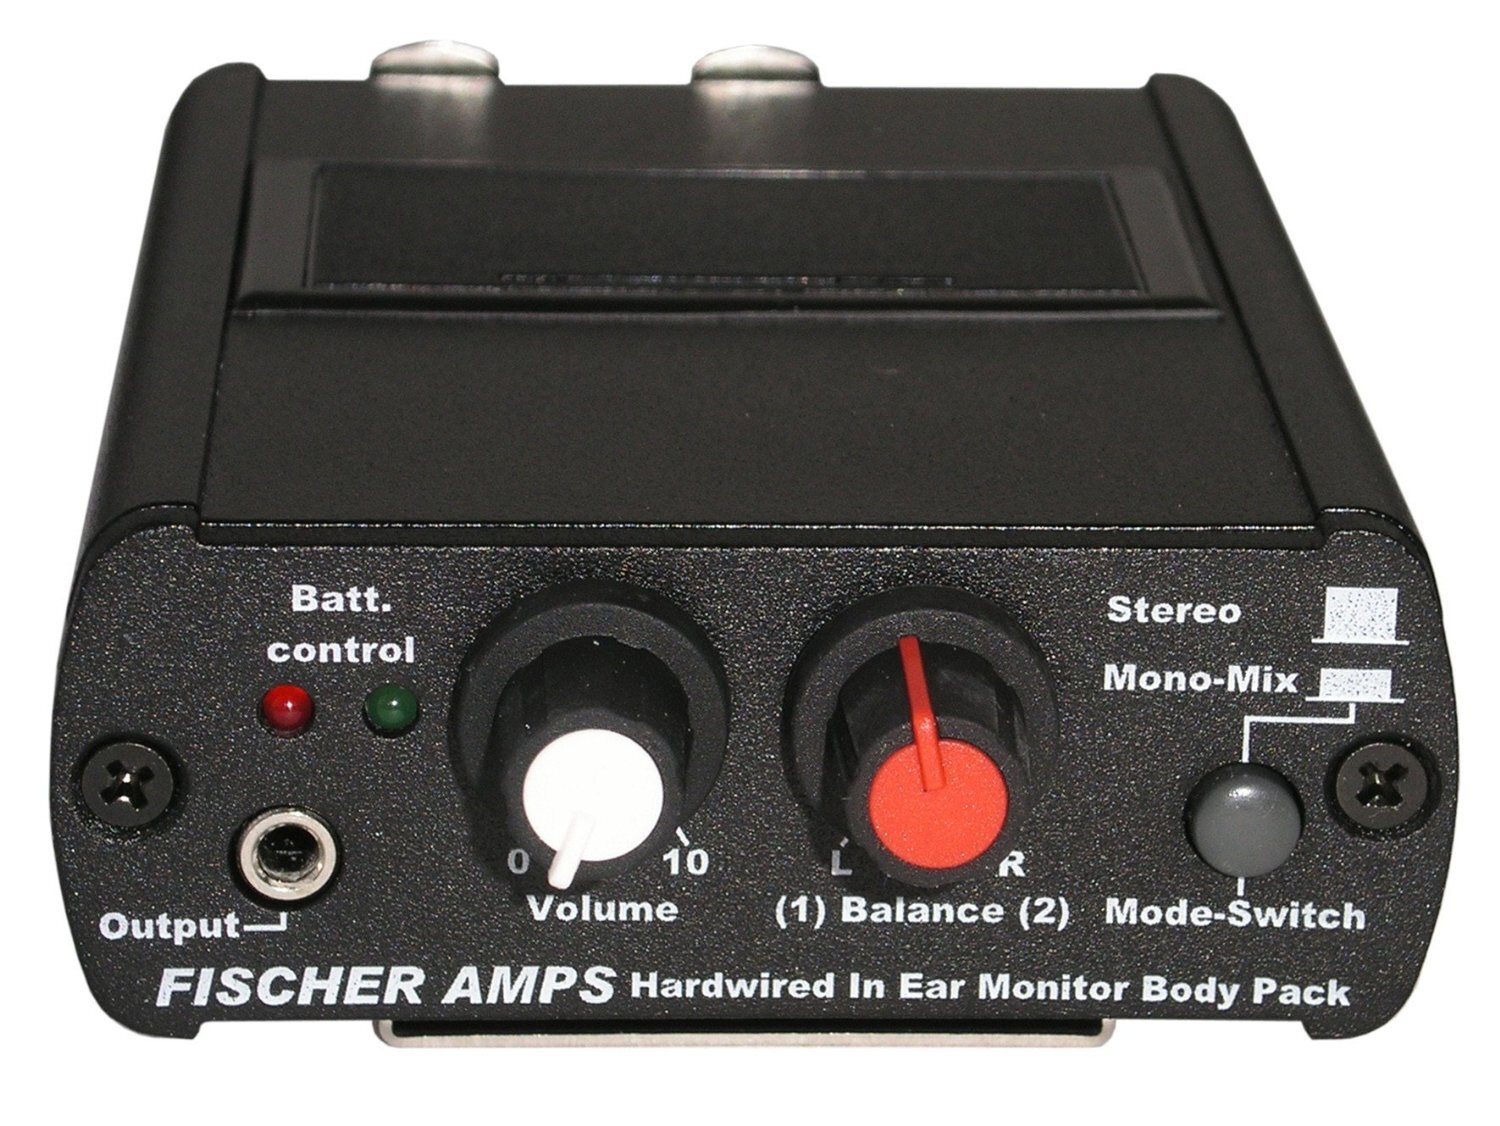 Fischer Amps Hardwired Body Pack : photo 1